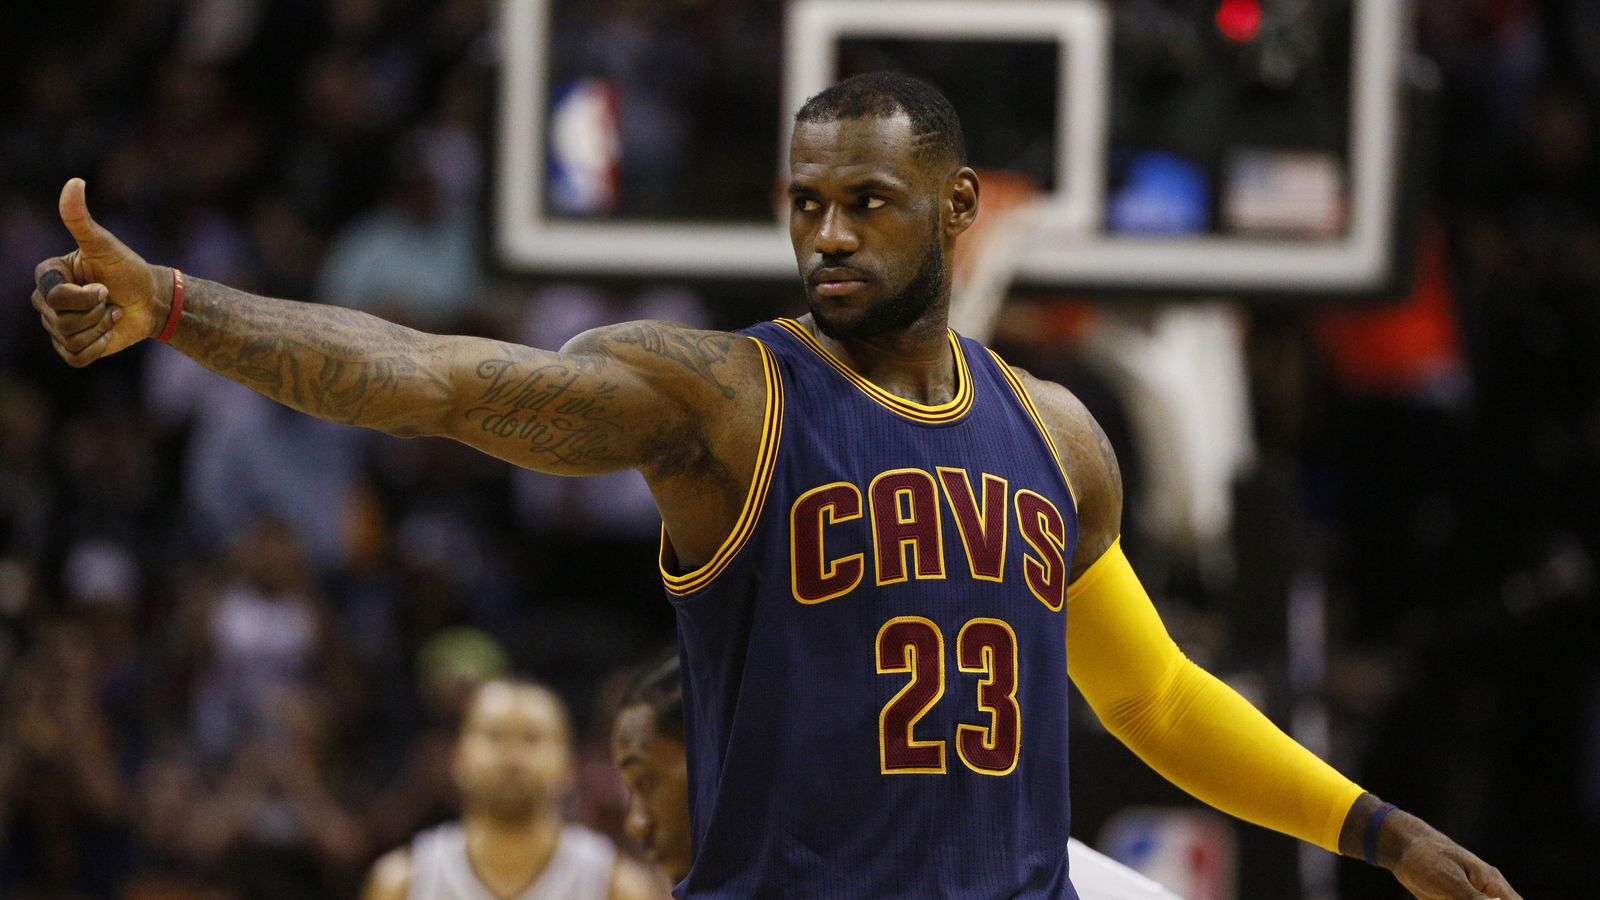 Dennis Rodman: LeBron James would be 'average player' in late '80s